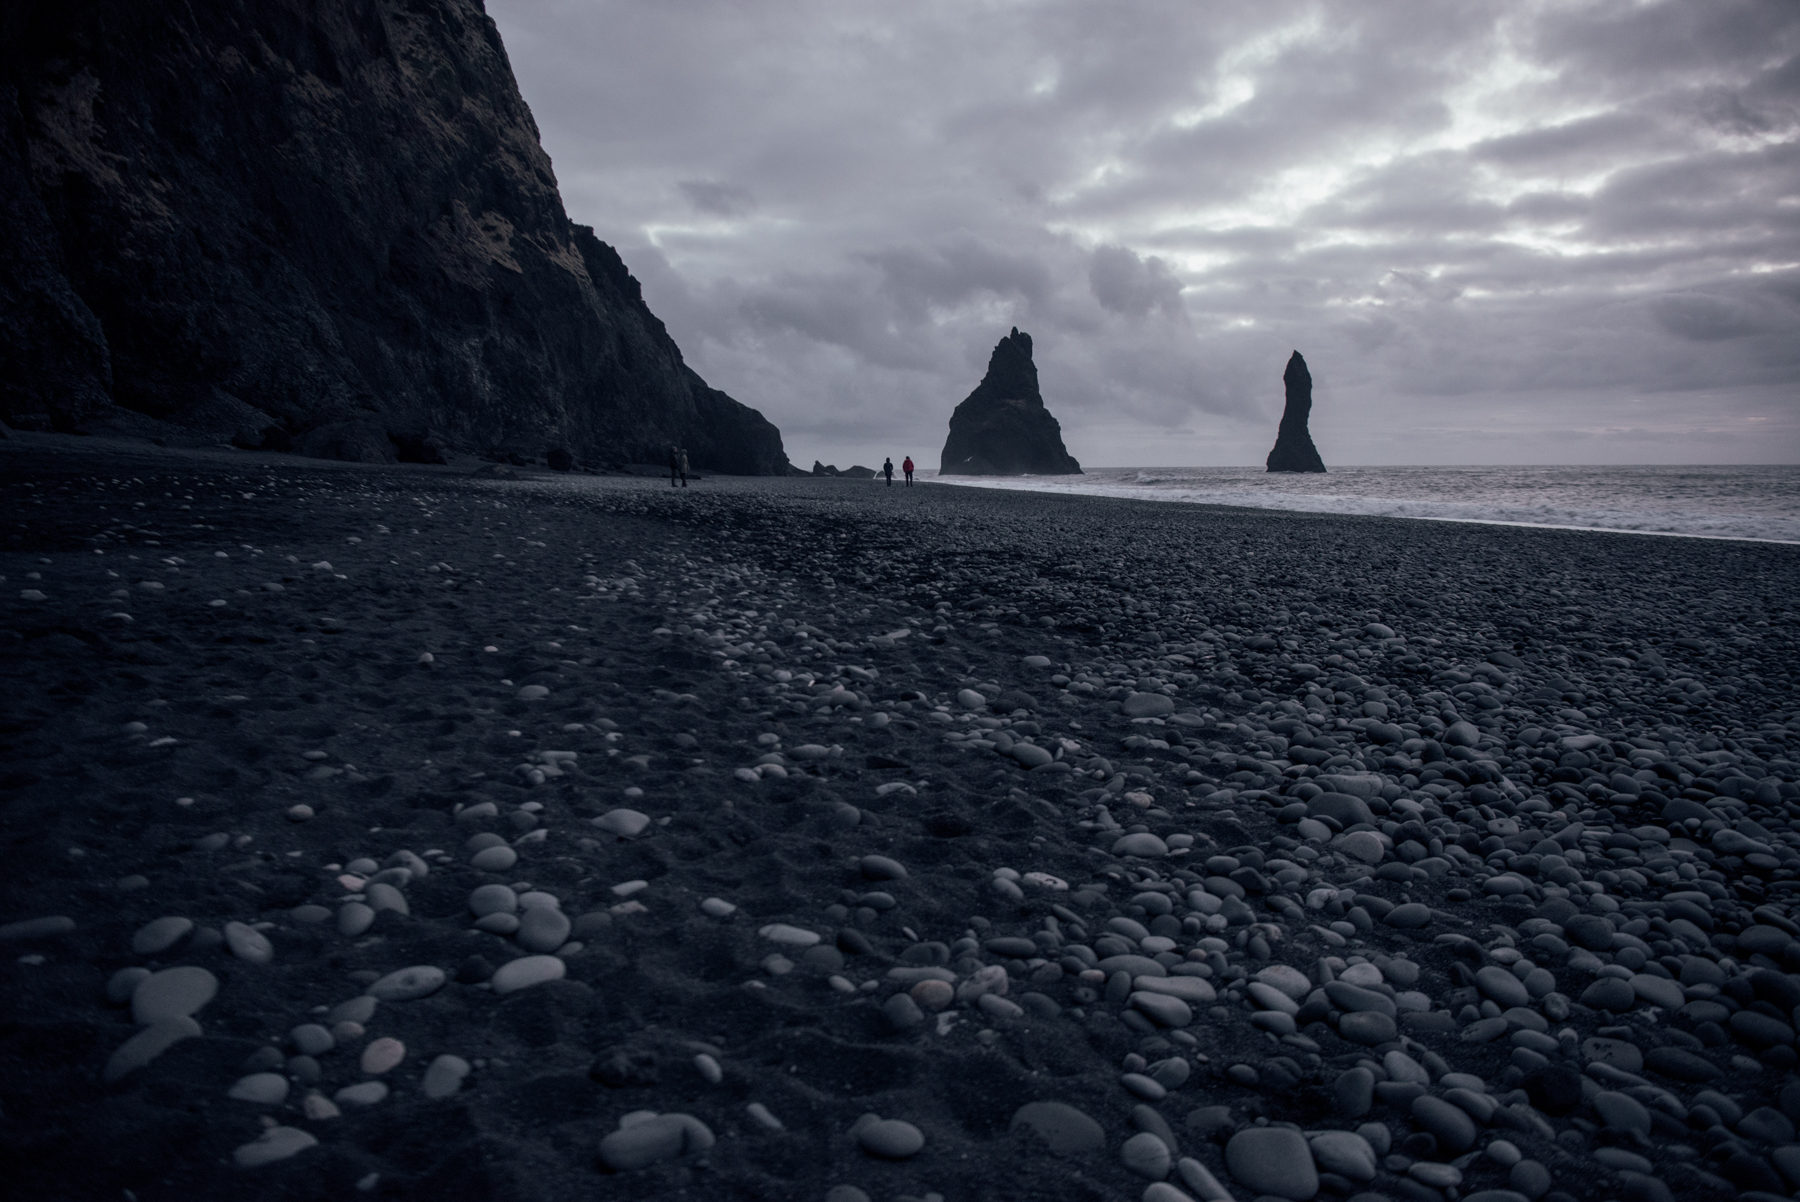 Iceland – Black Sand Beach near Vik. Trip to Iceland with Katie and Holly 1/1-1/7.